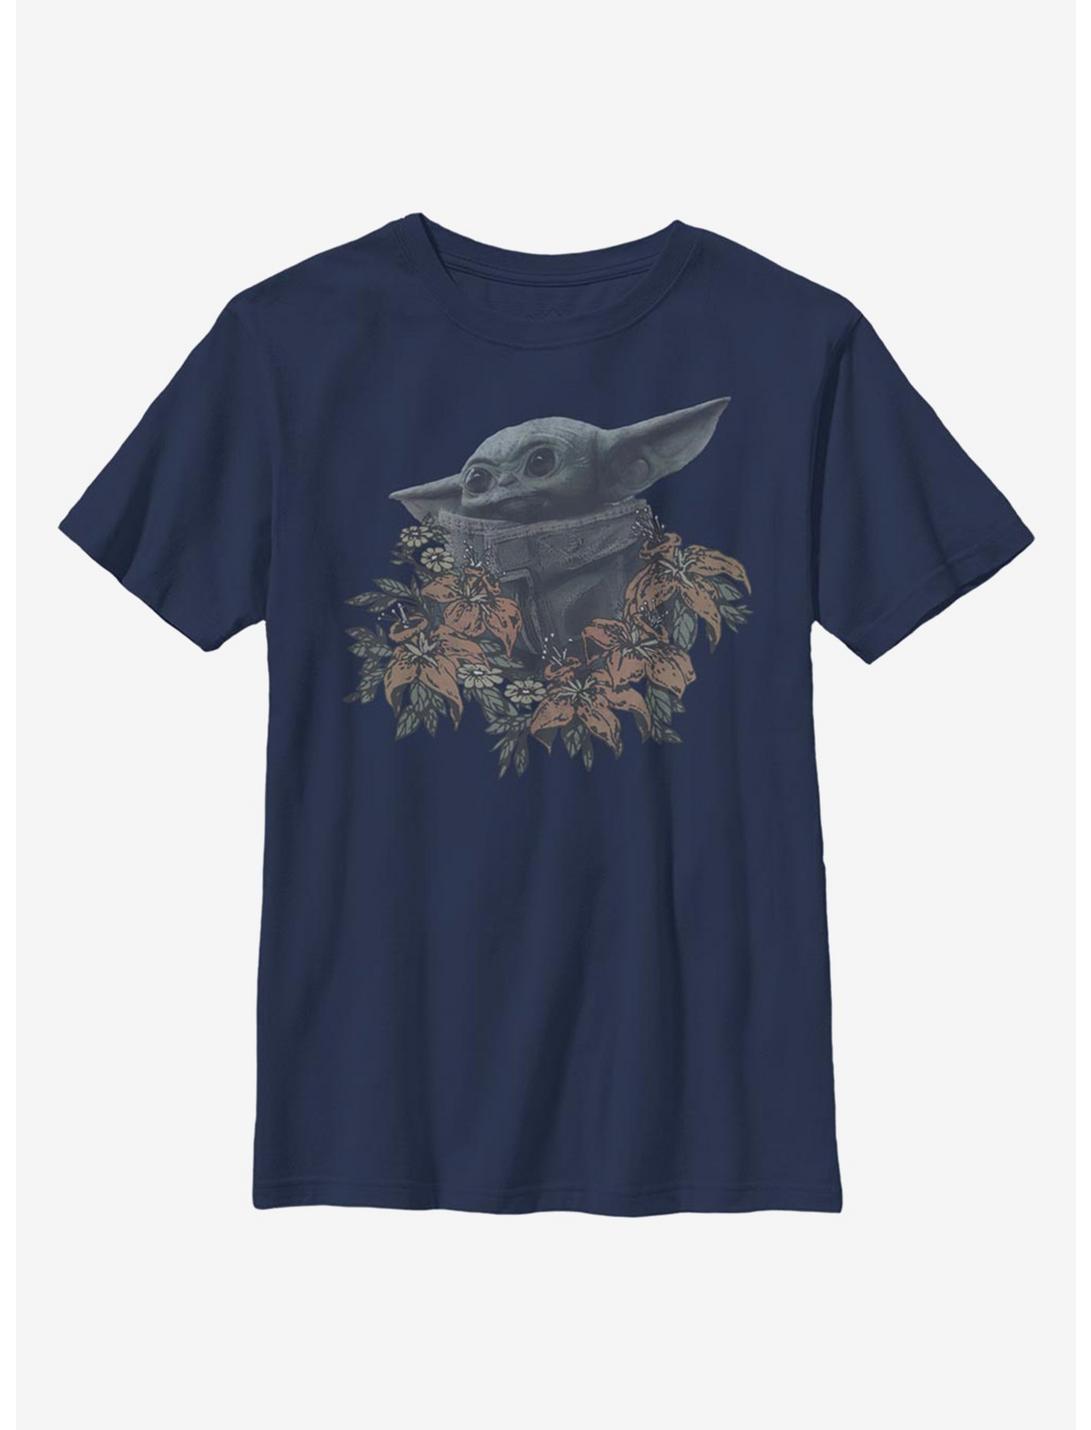 Star Wars The Mandalorian The Child Flowers Youth T-Shirt, NAVY, hi-res